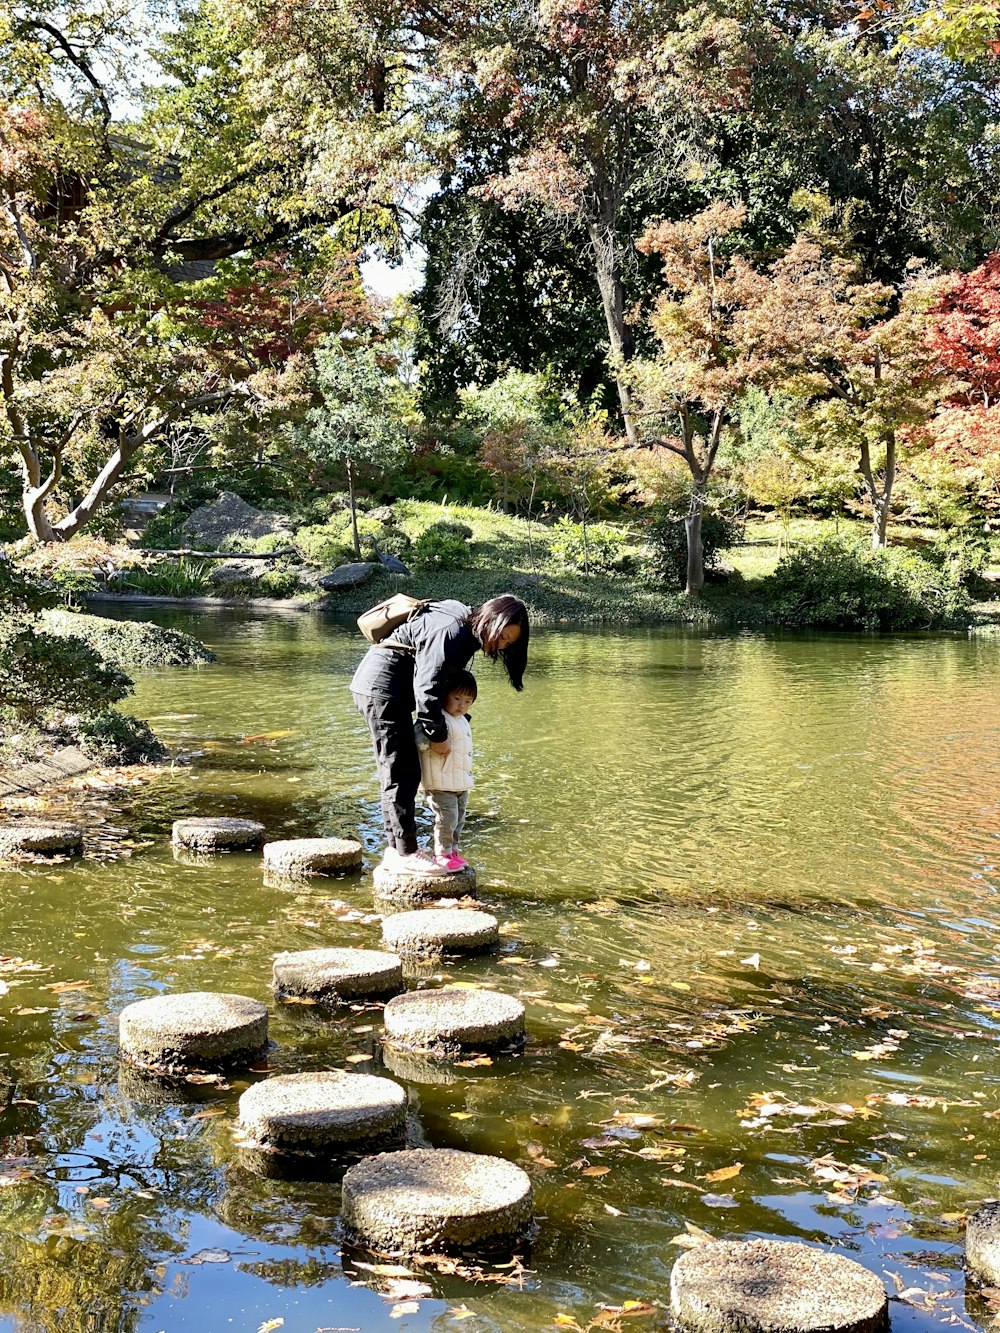 a person standing on stepping stones in a river